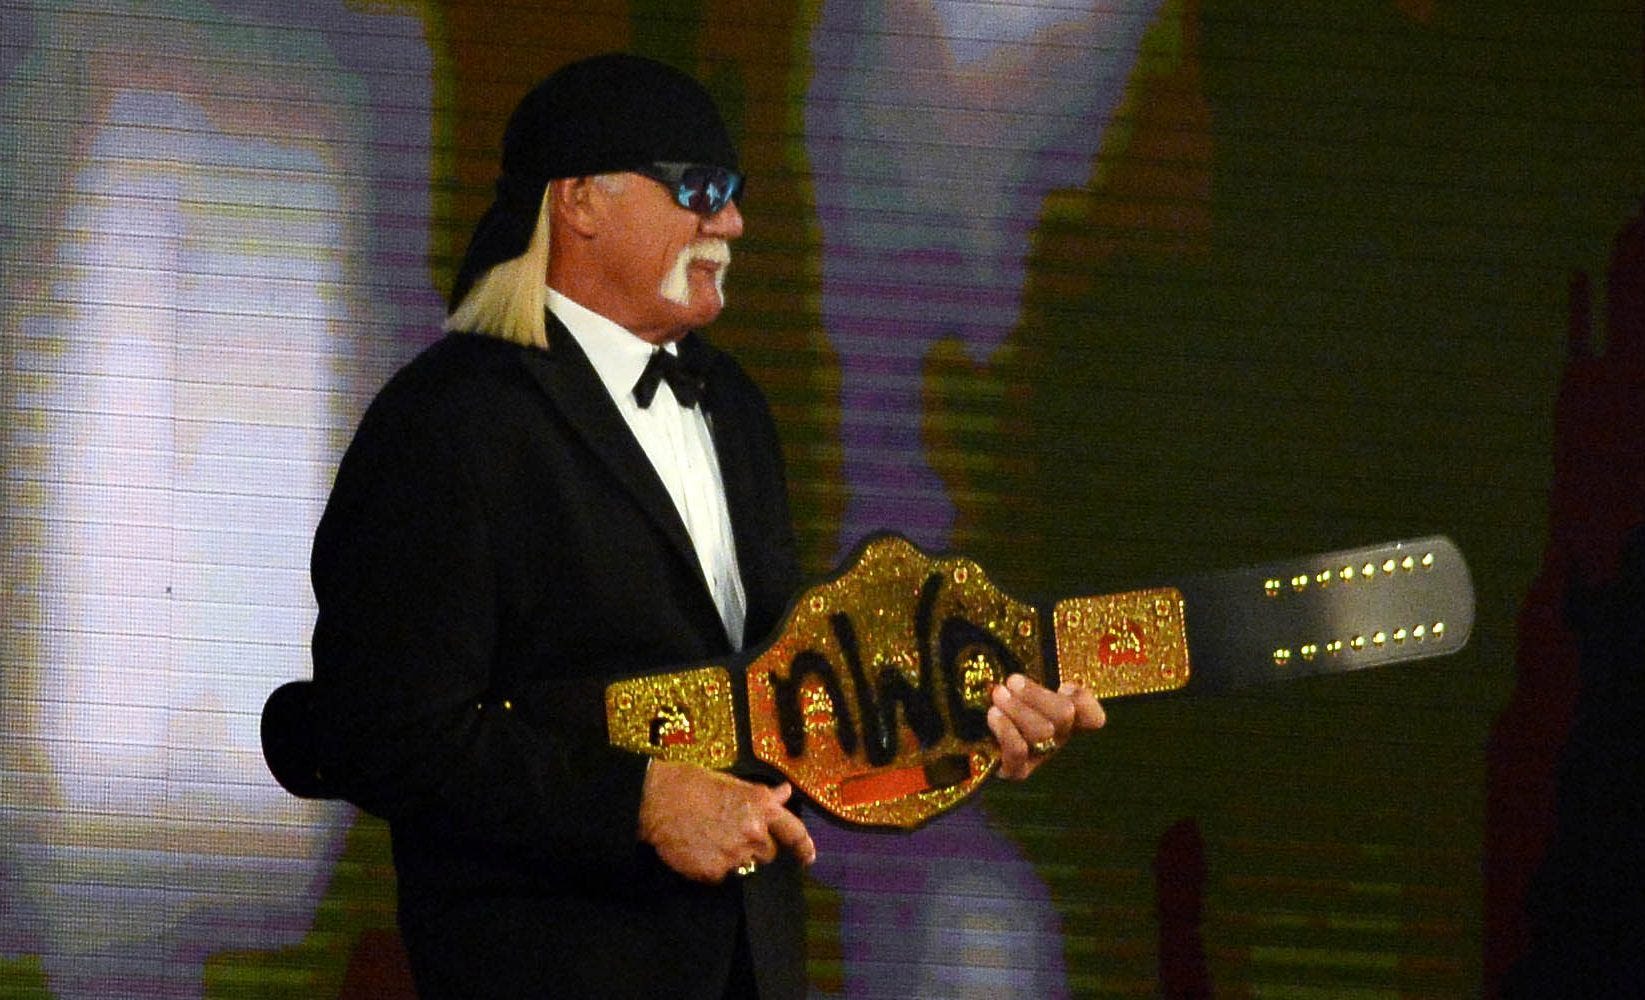 Hulk Hogan speaking tonight at the RNC. What to know about Florida wrestling legend